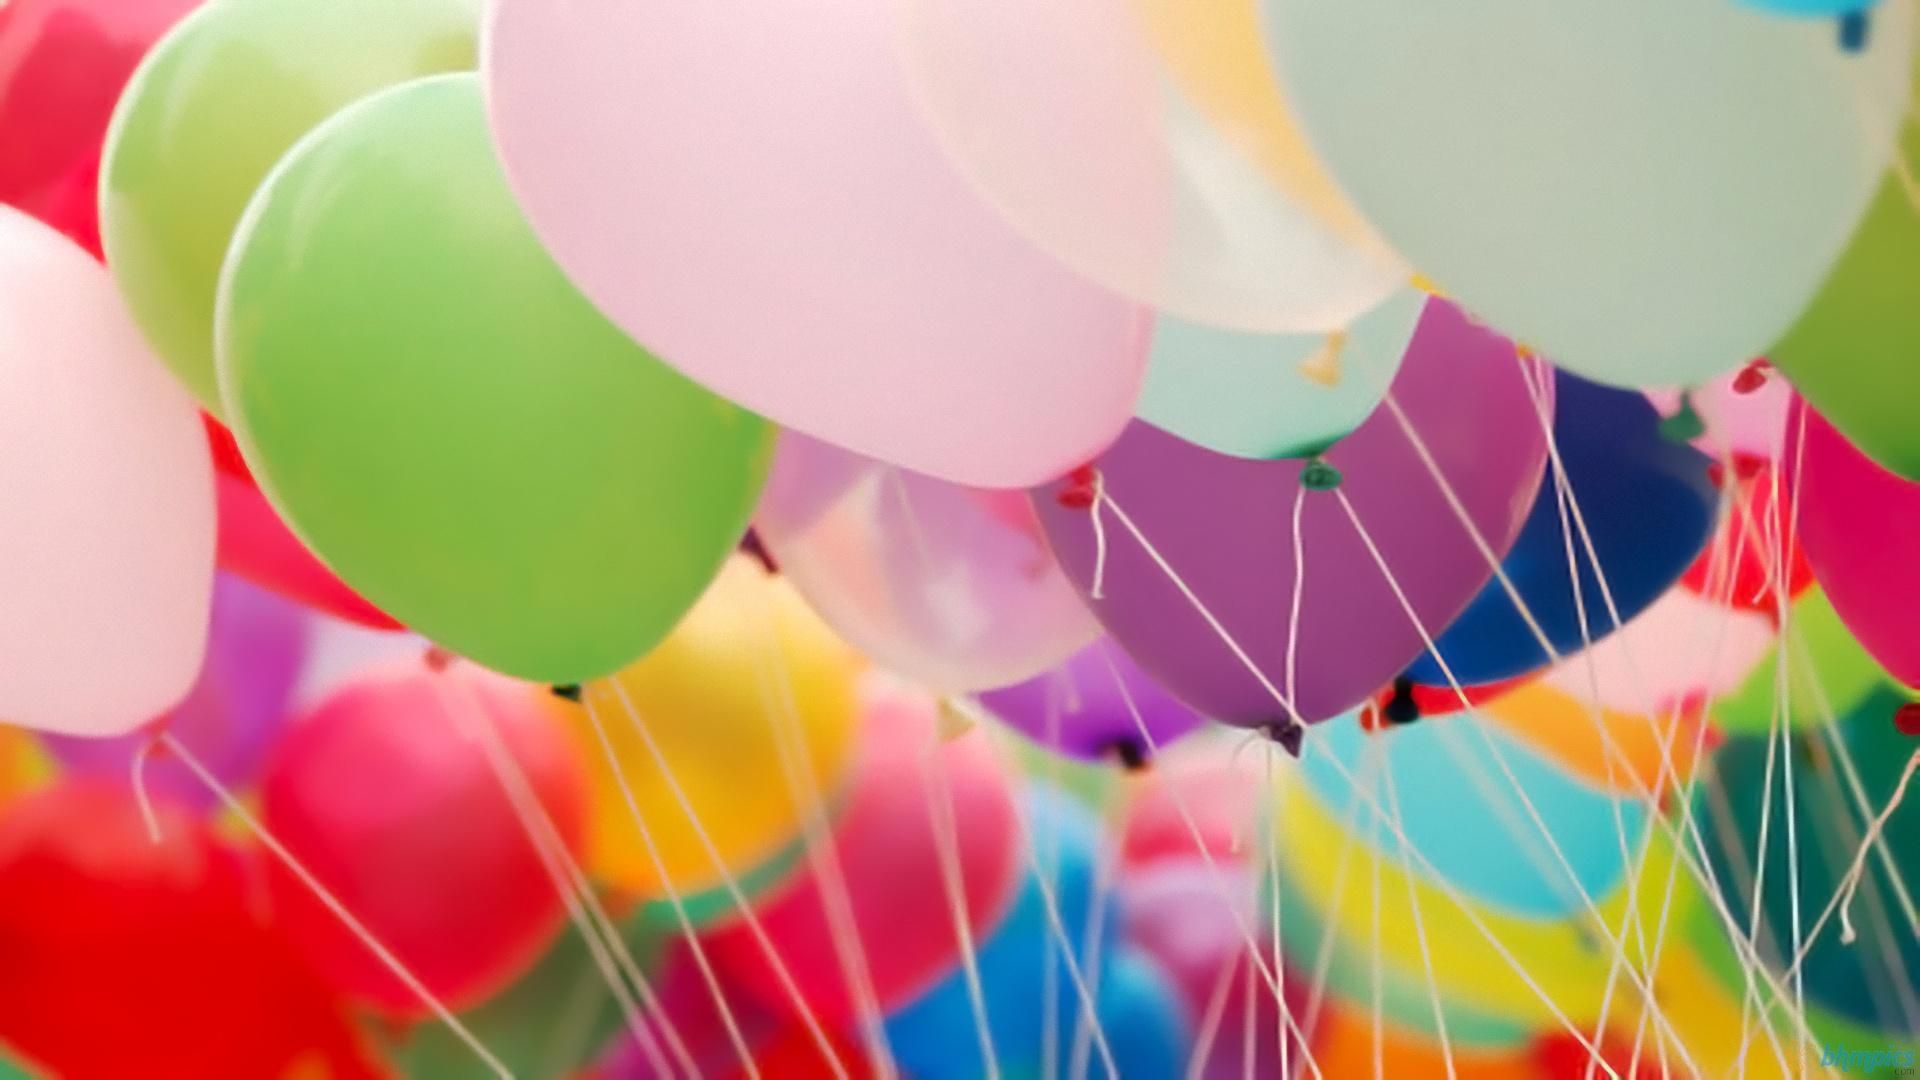 Colourful Baloons >> HD Wallpaper, get it now!